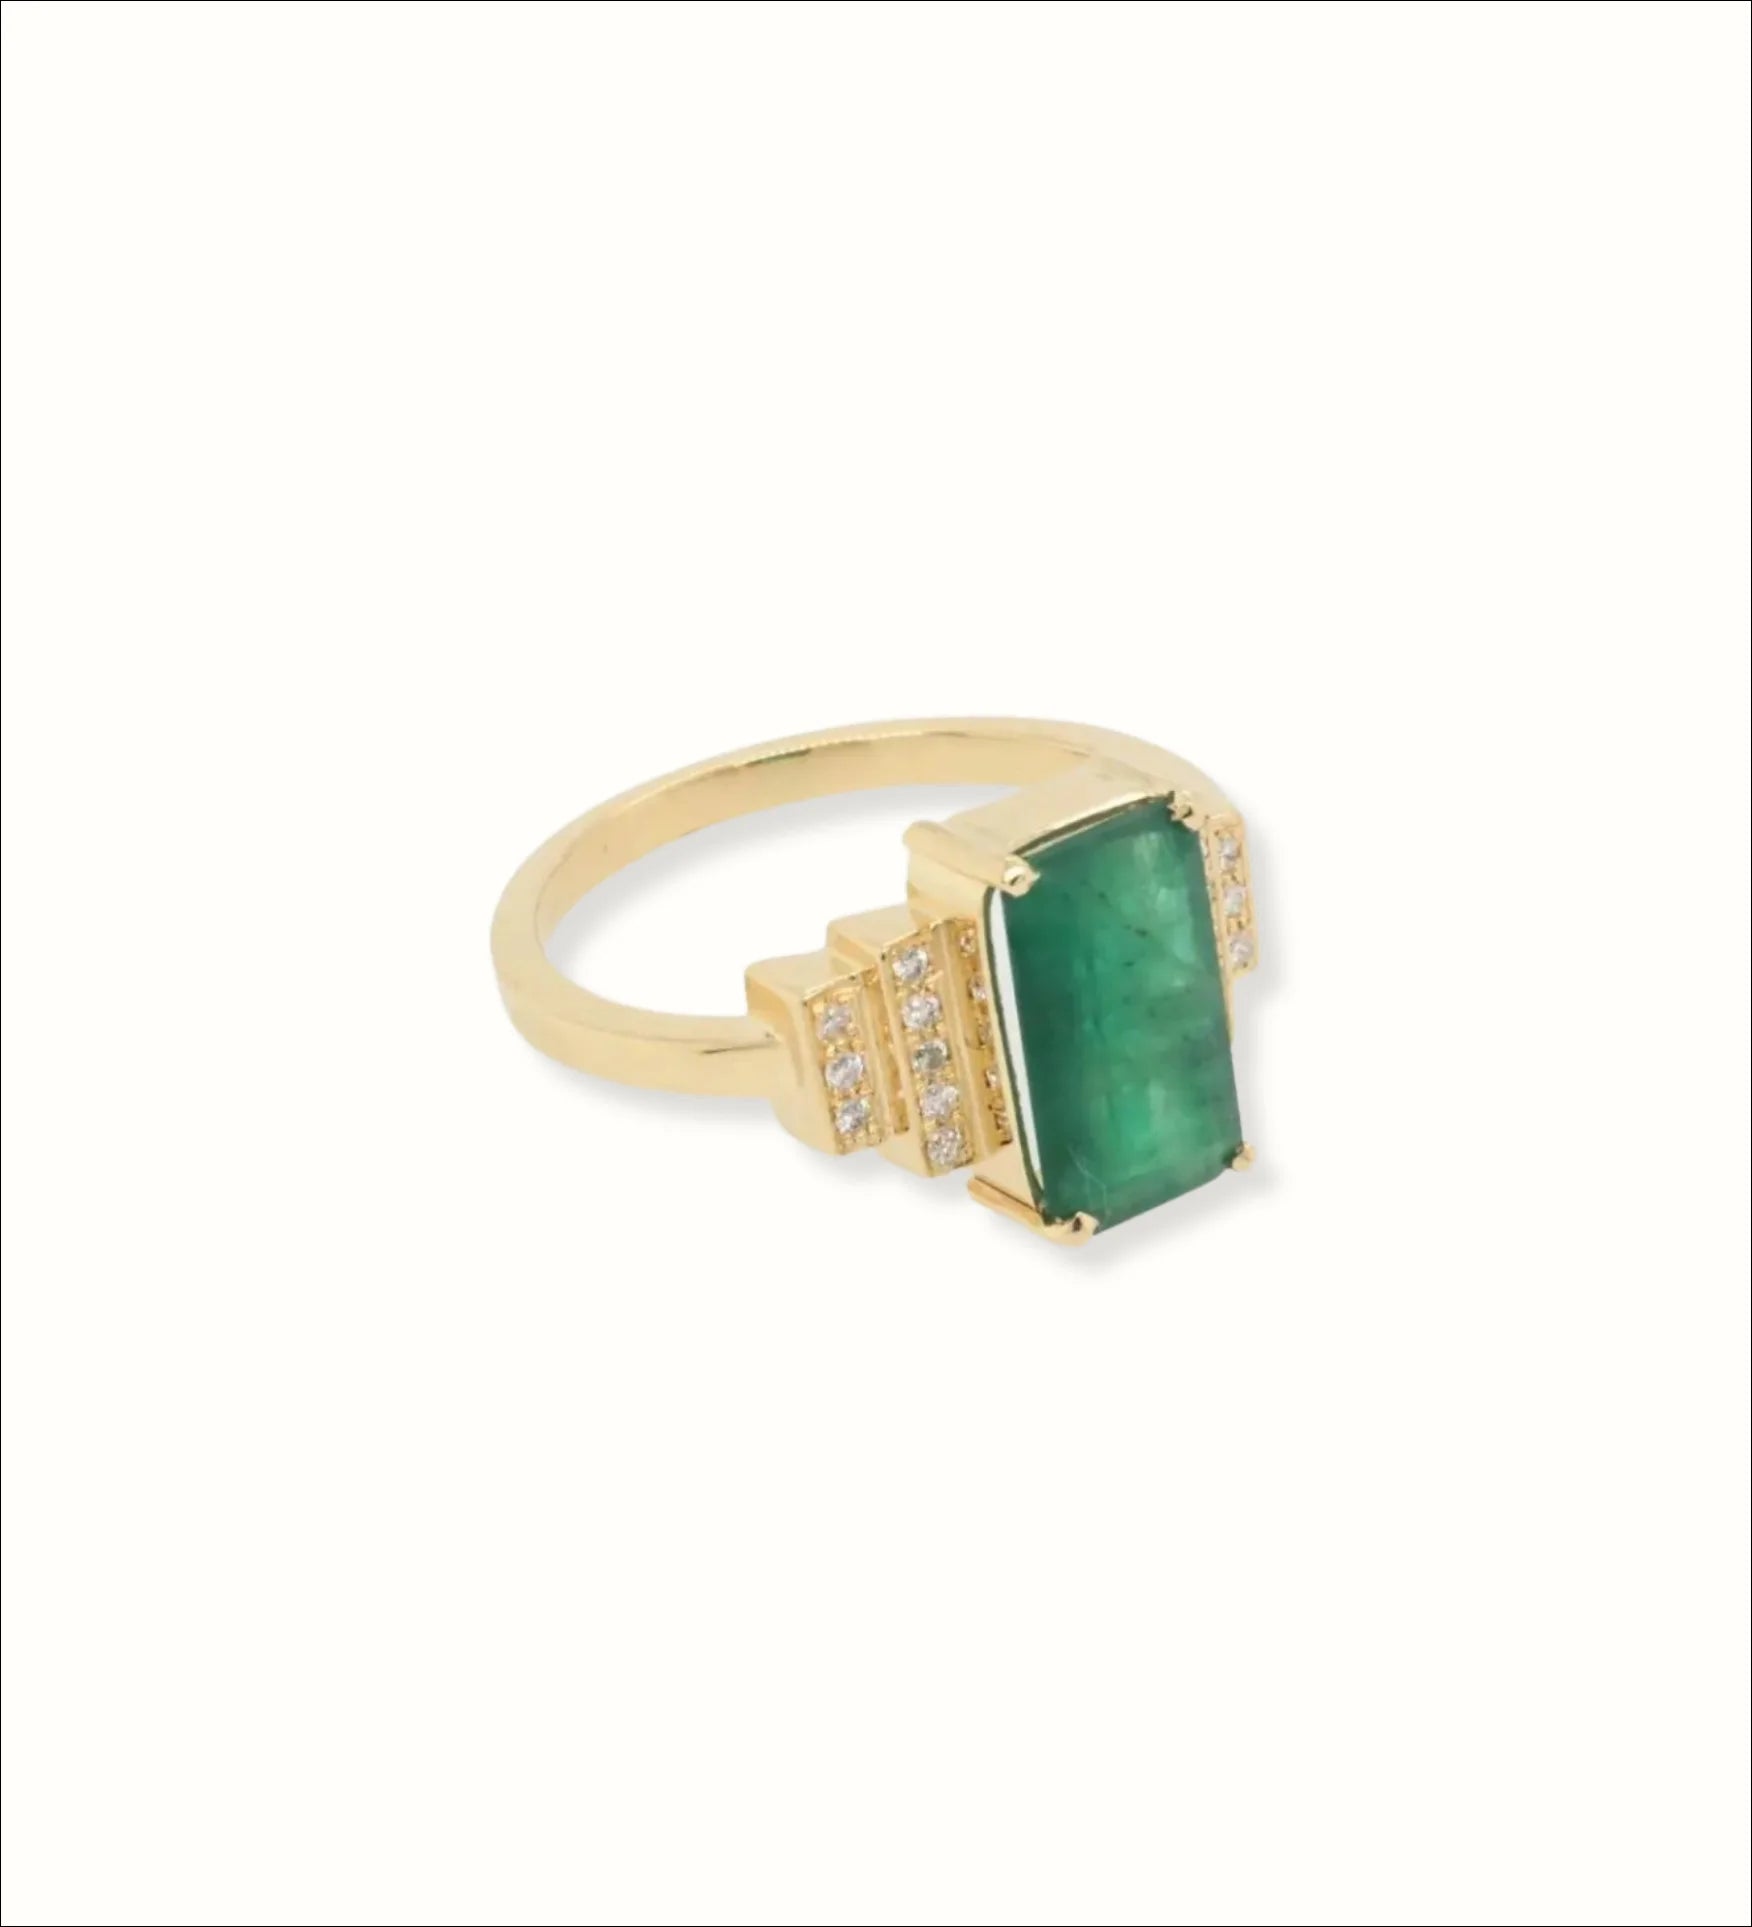 Exquisite 18k Gold Ring with 2.3ct Emerald | Above $1000